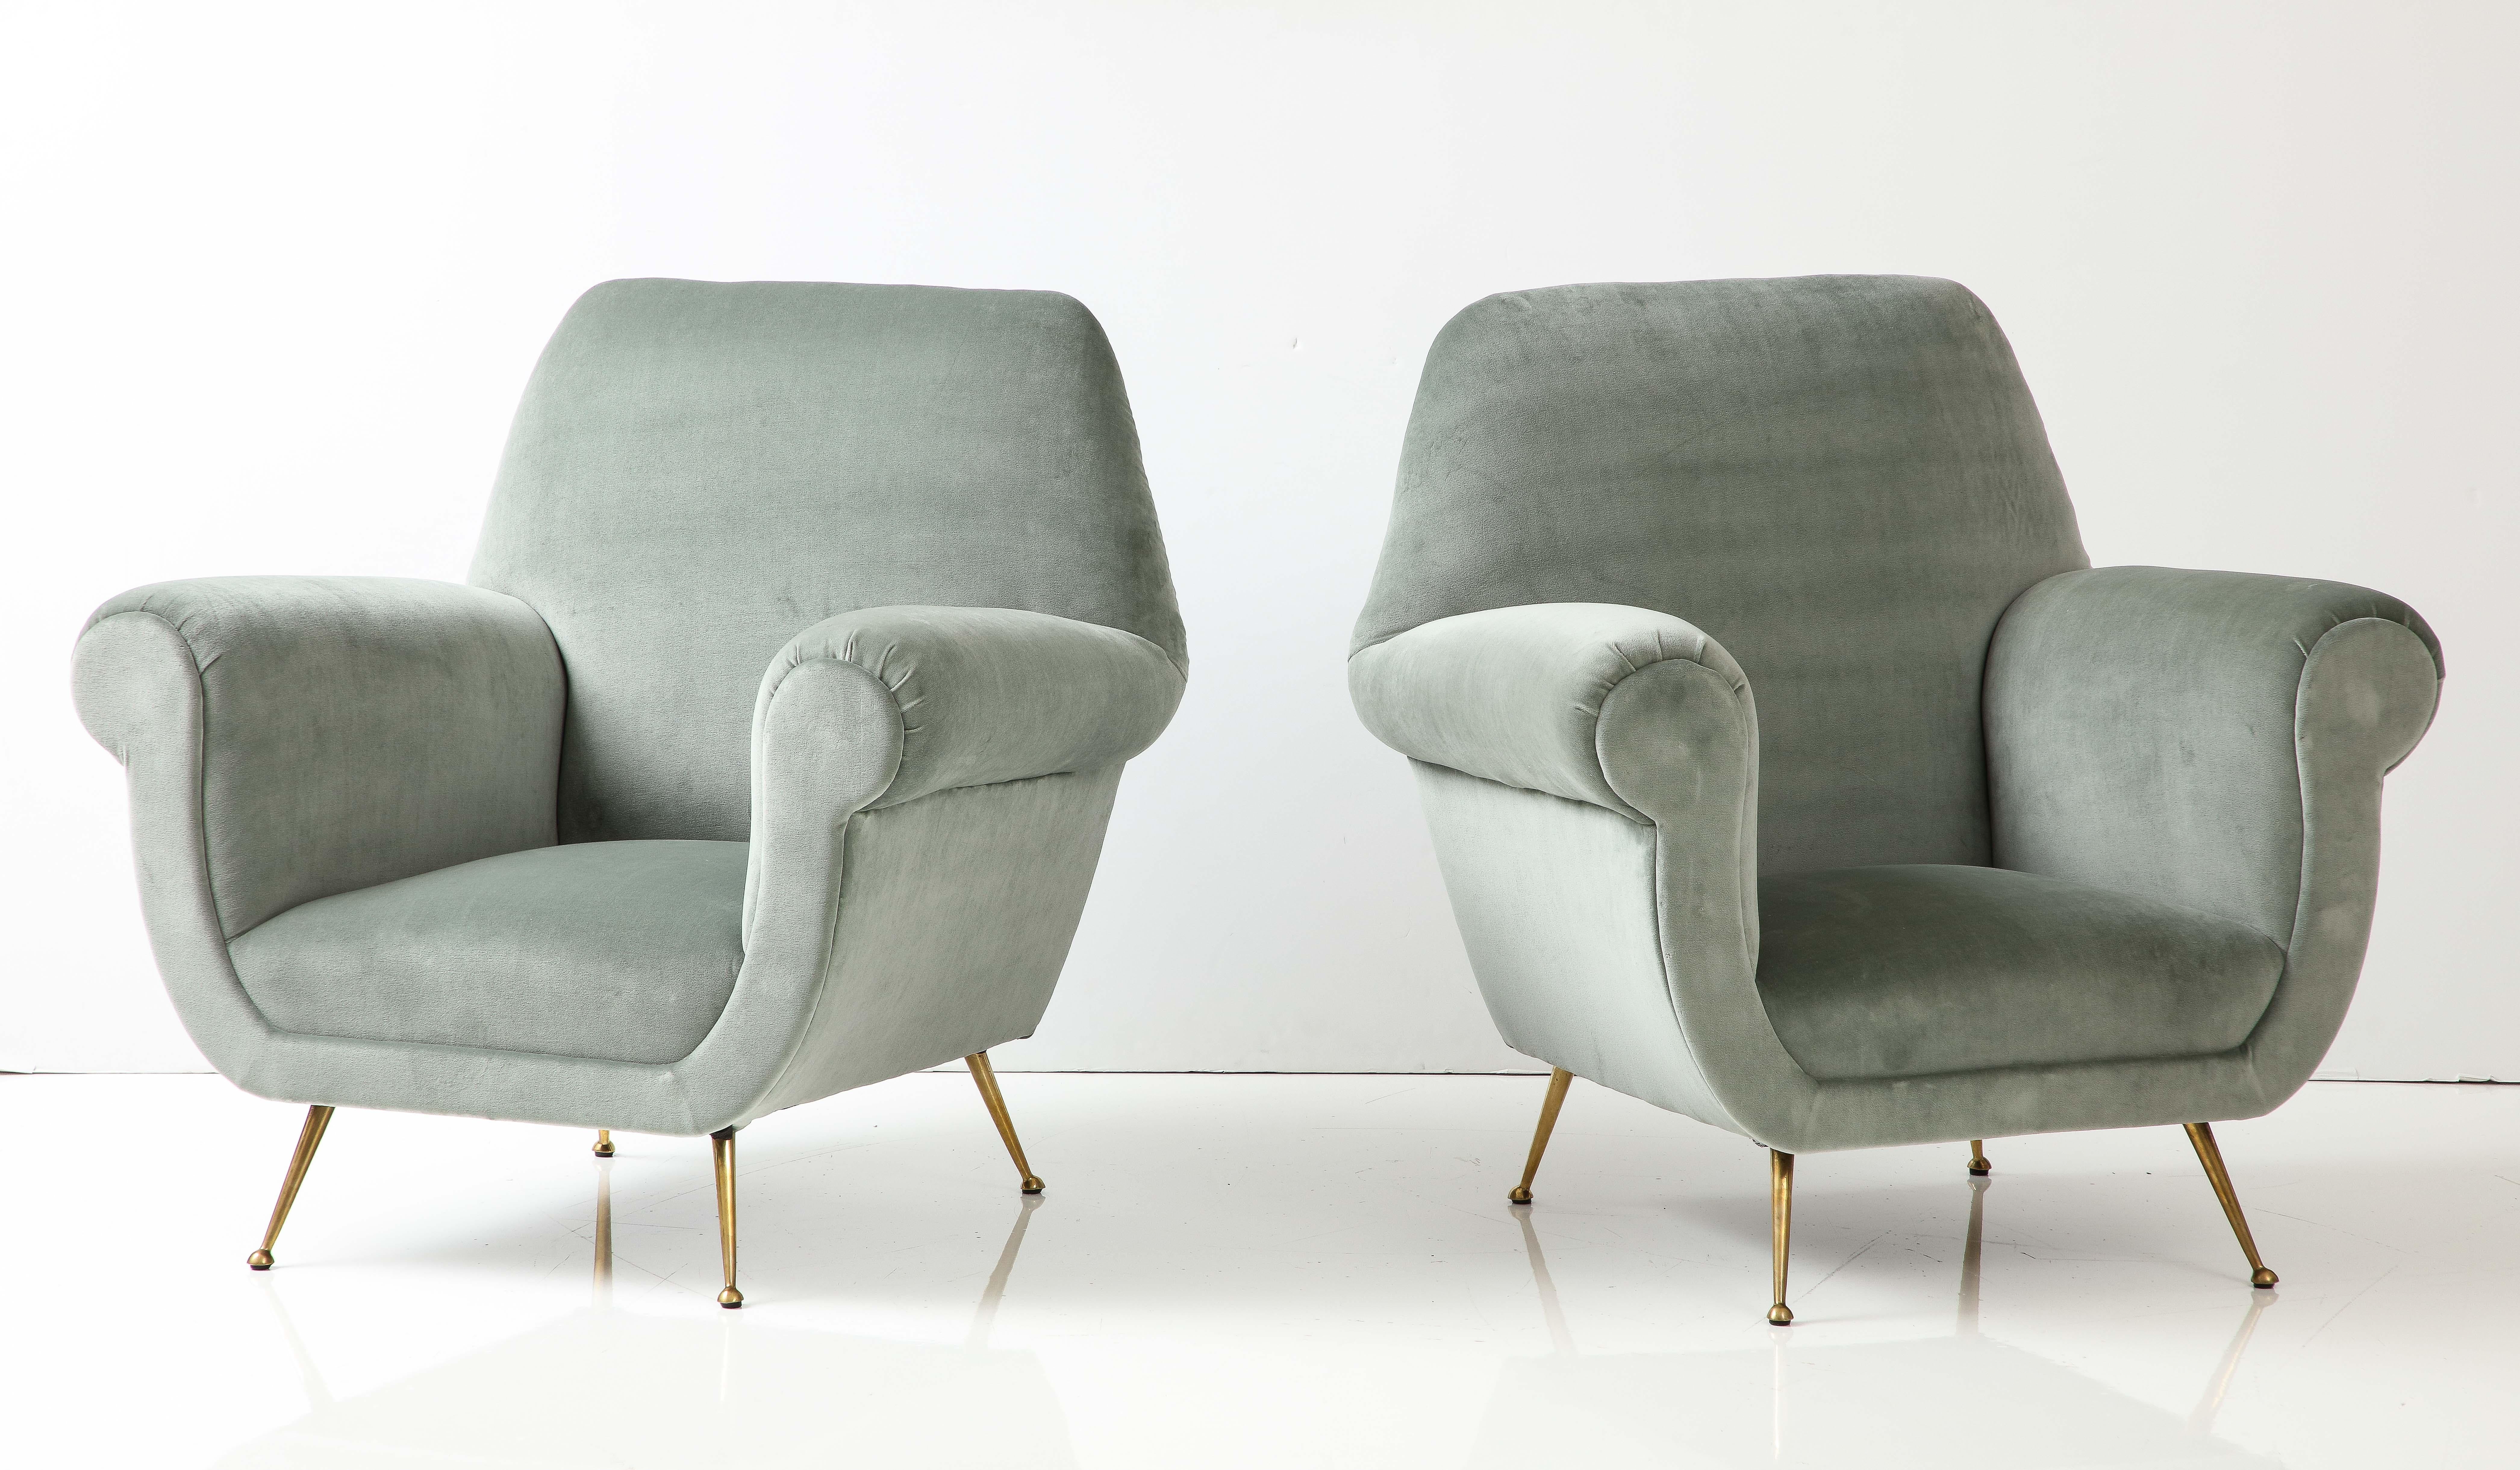 1950s Modernist Lounge Chairs by Gigi Radice In Good Condition For Sale In New York, NY